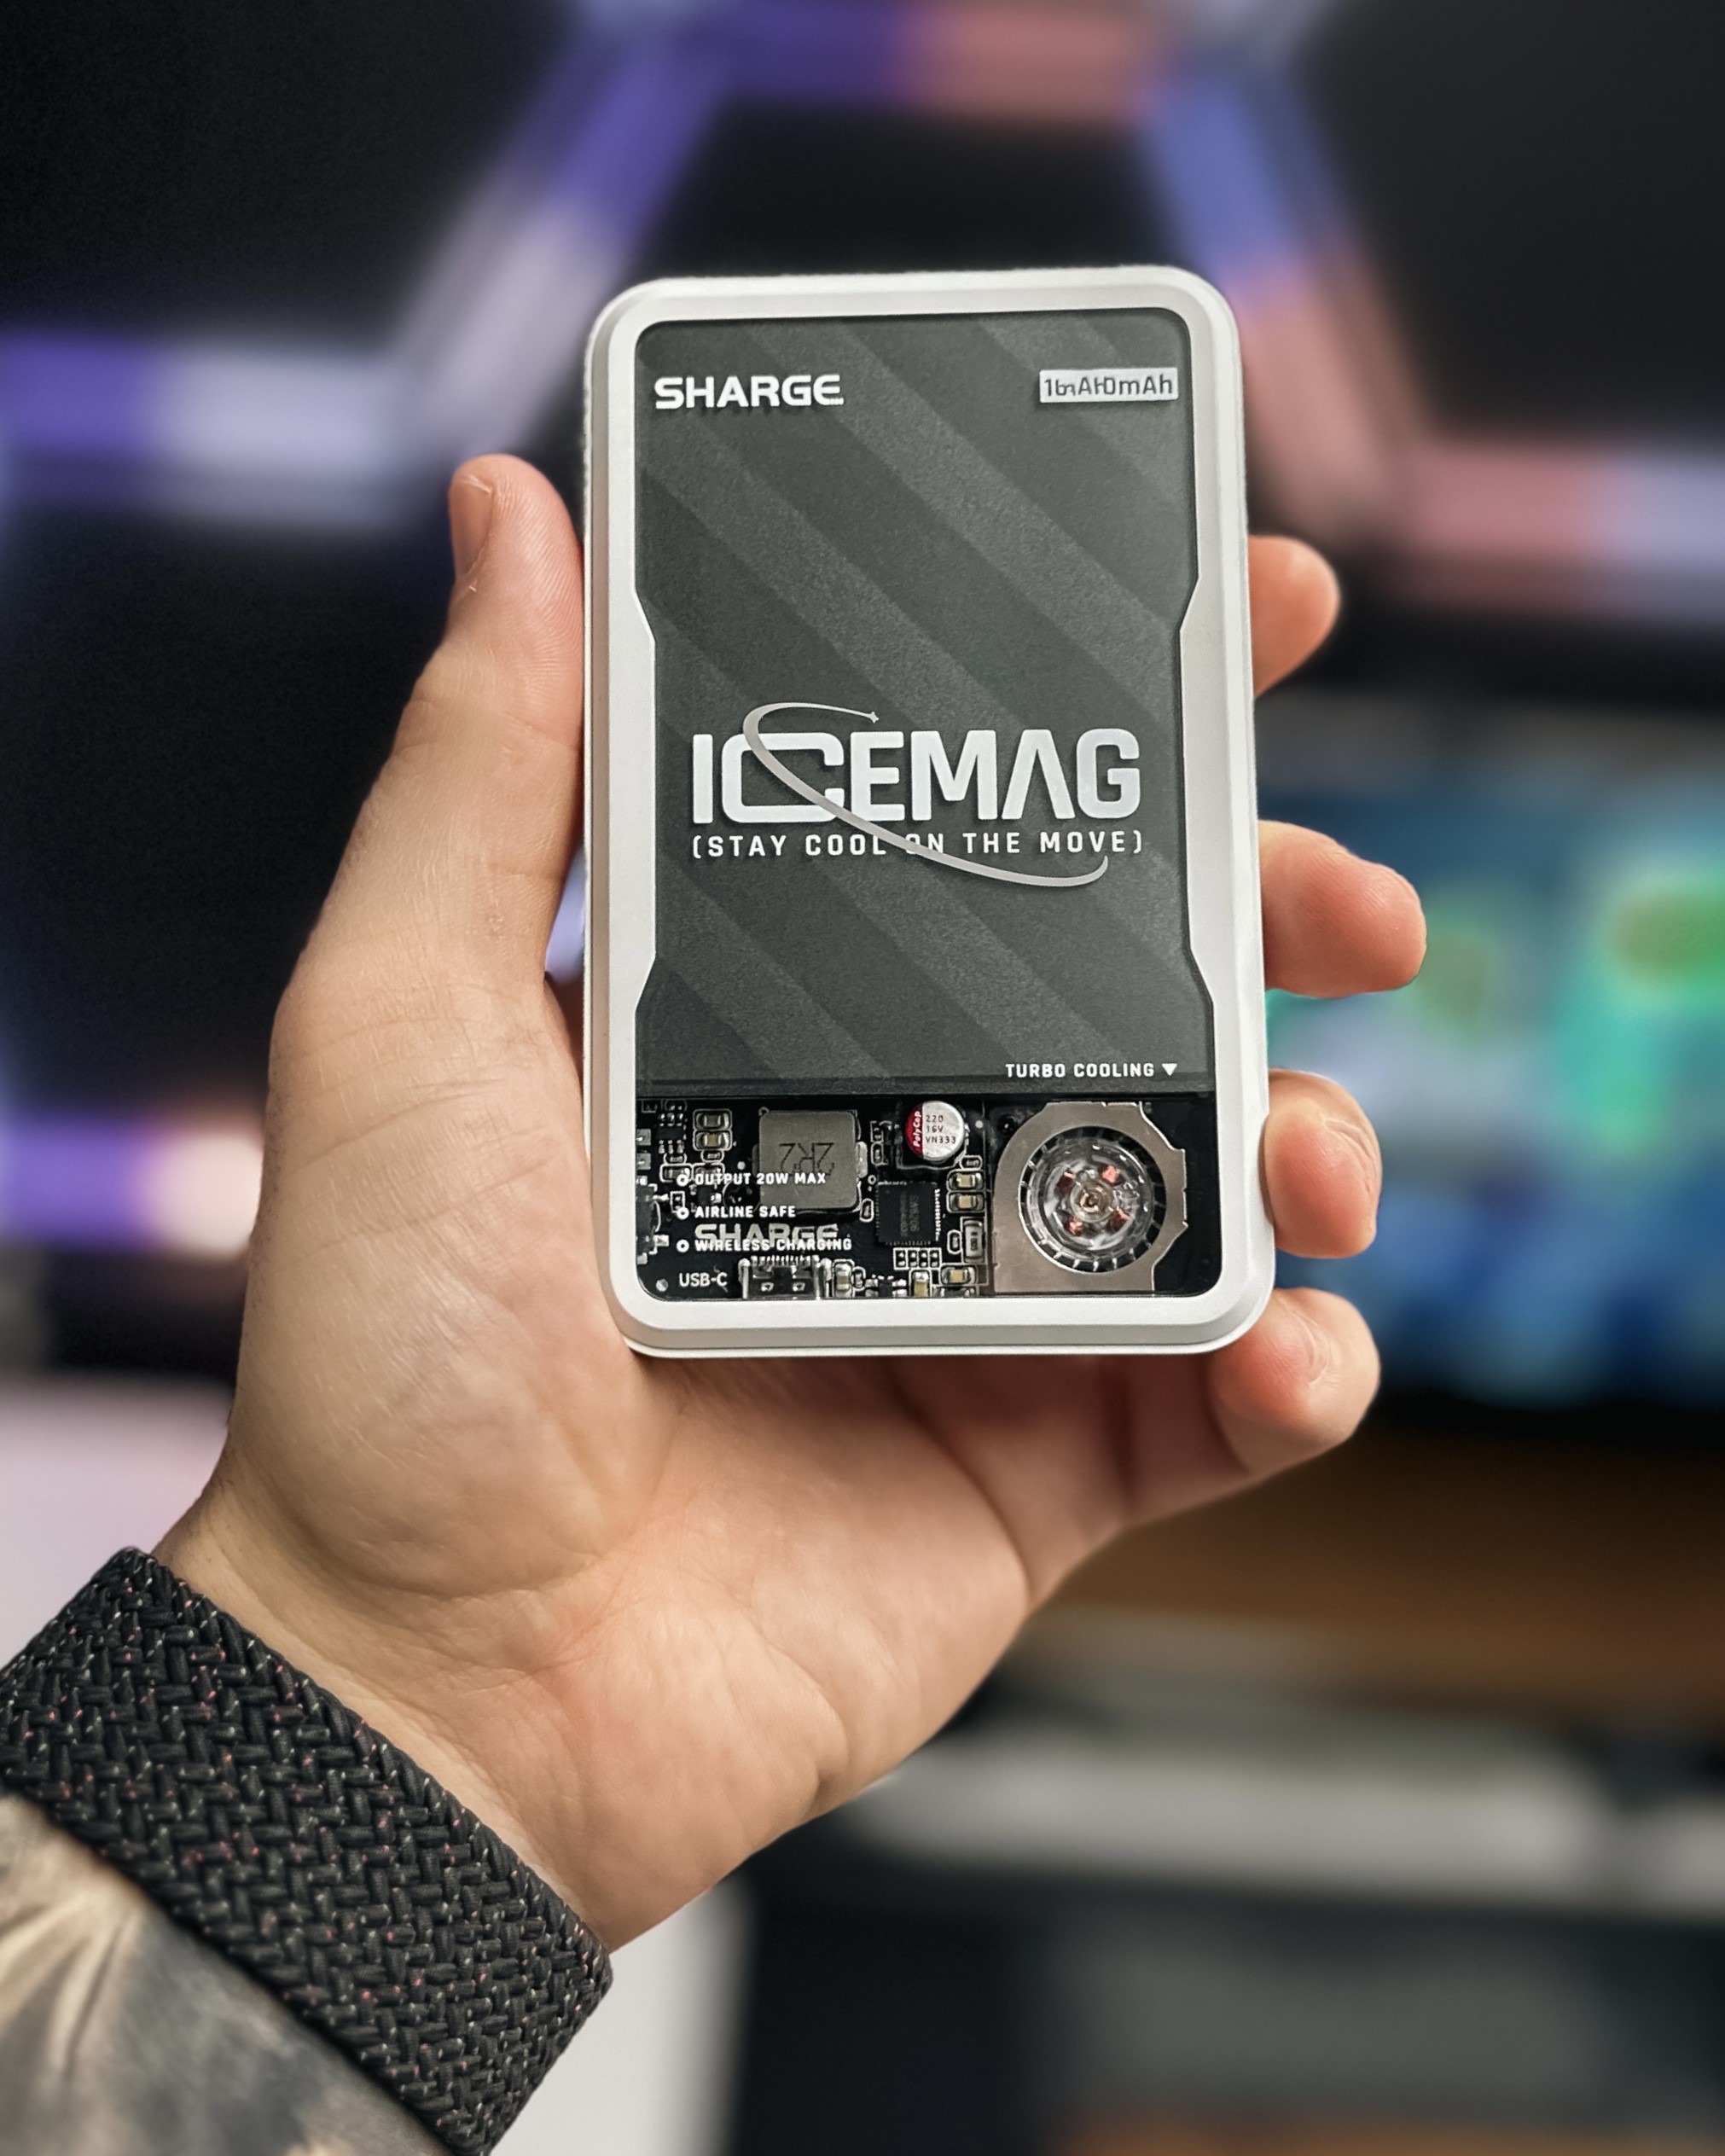 SHARGE on X: Compact. Powerful. Stay connected anywhere. ICEMAG ensures  your iPhone stays charged on the go. Credit to @paradoxperfected Shop at   #SHARGE #magsafe #iphone #powerbank  #wirelesscharging #icemag #tech